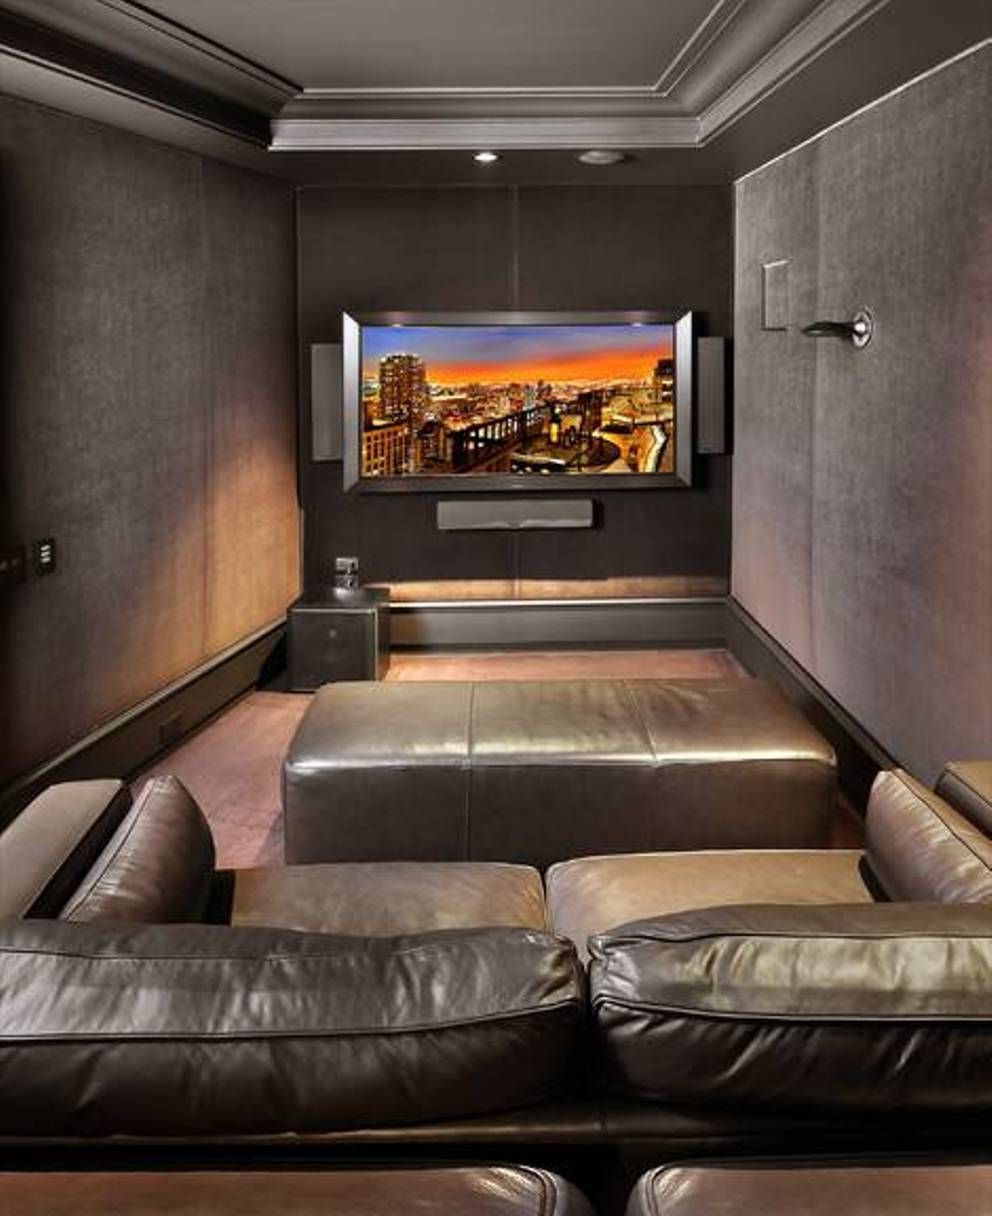 Home Design And Decor Small Home Theater Room Ideas